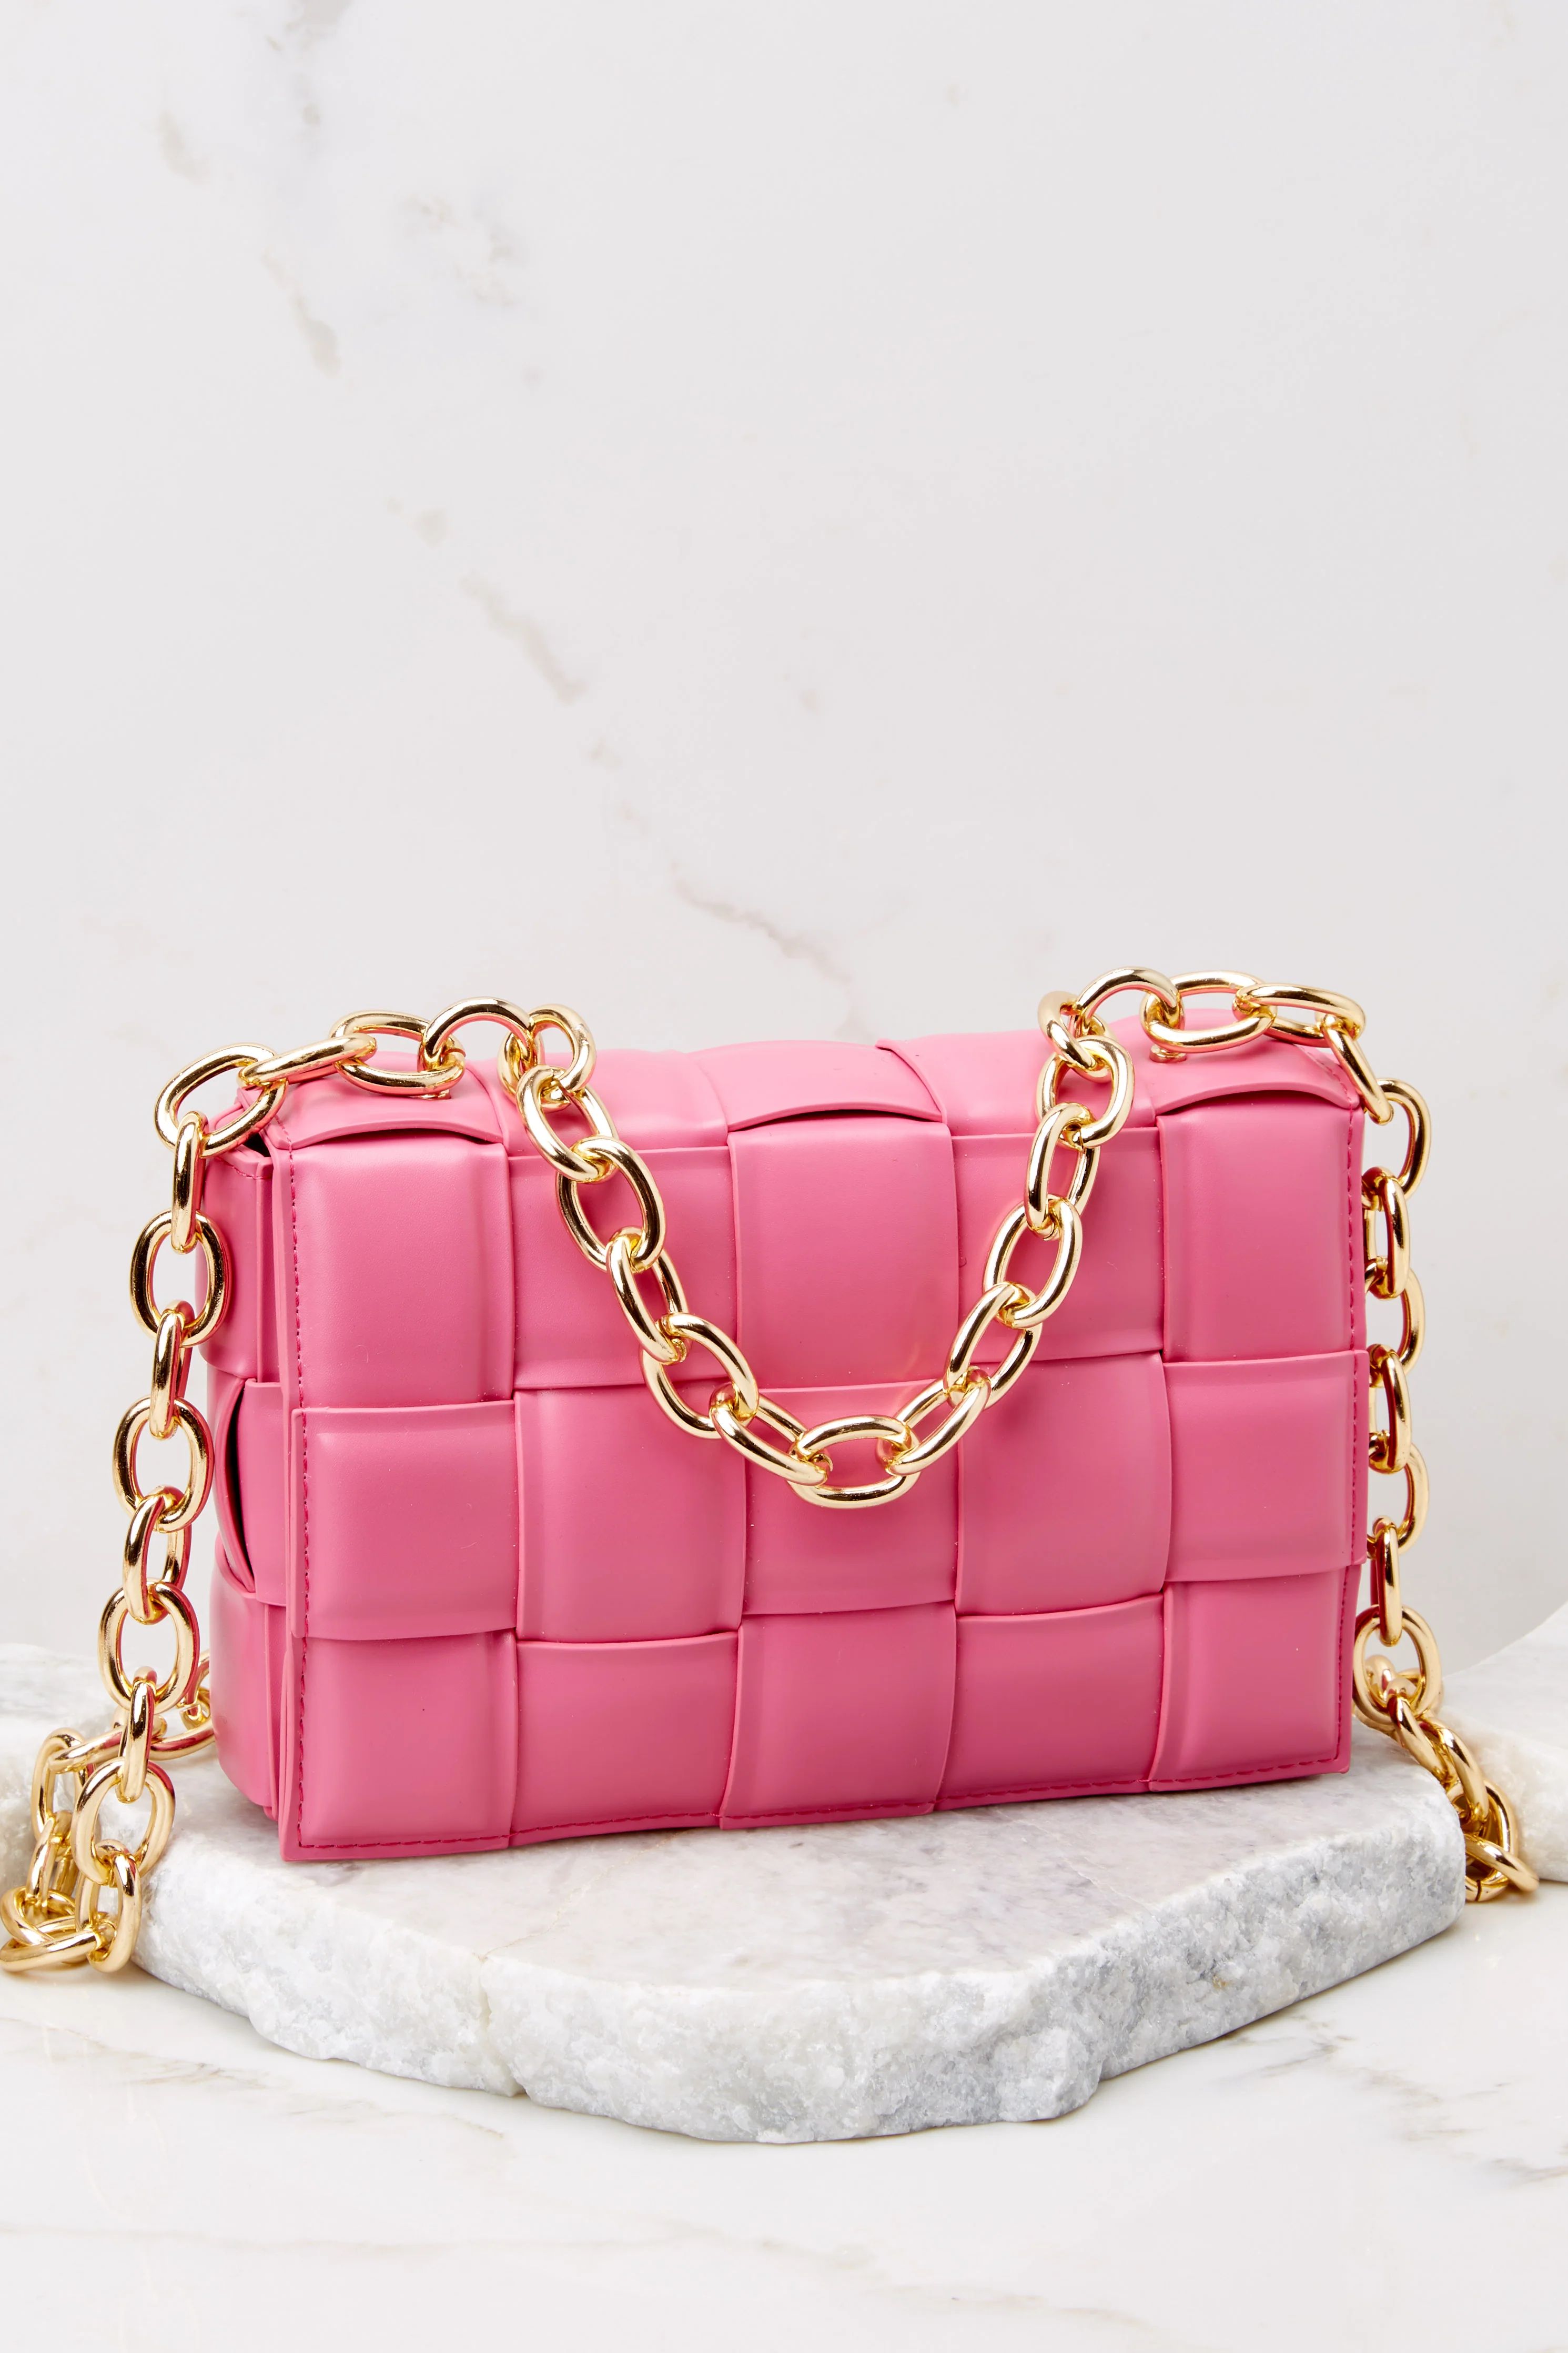 My One And Only Pink Chain Bag | Red Dress 